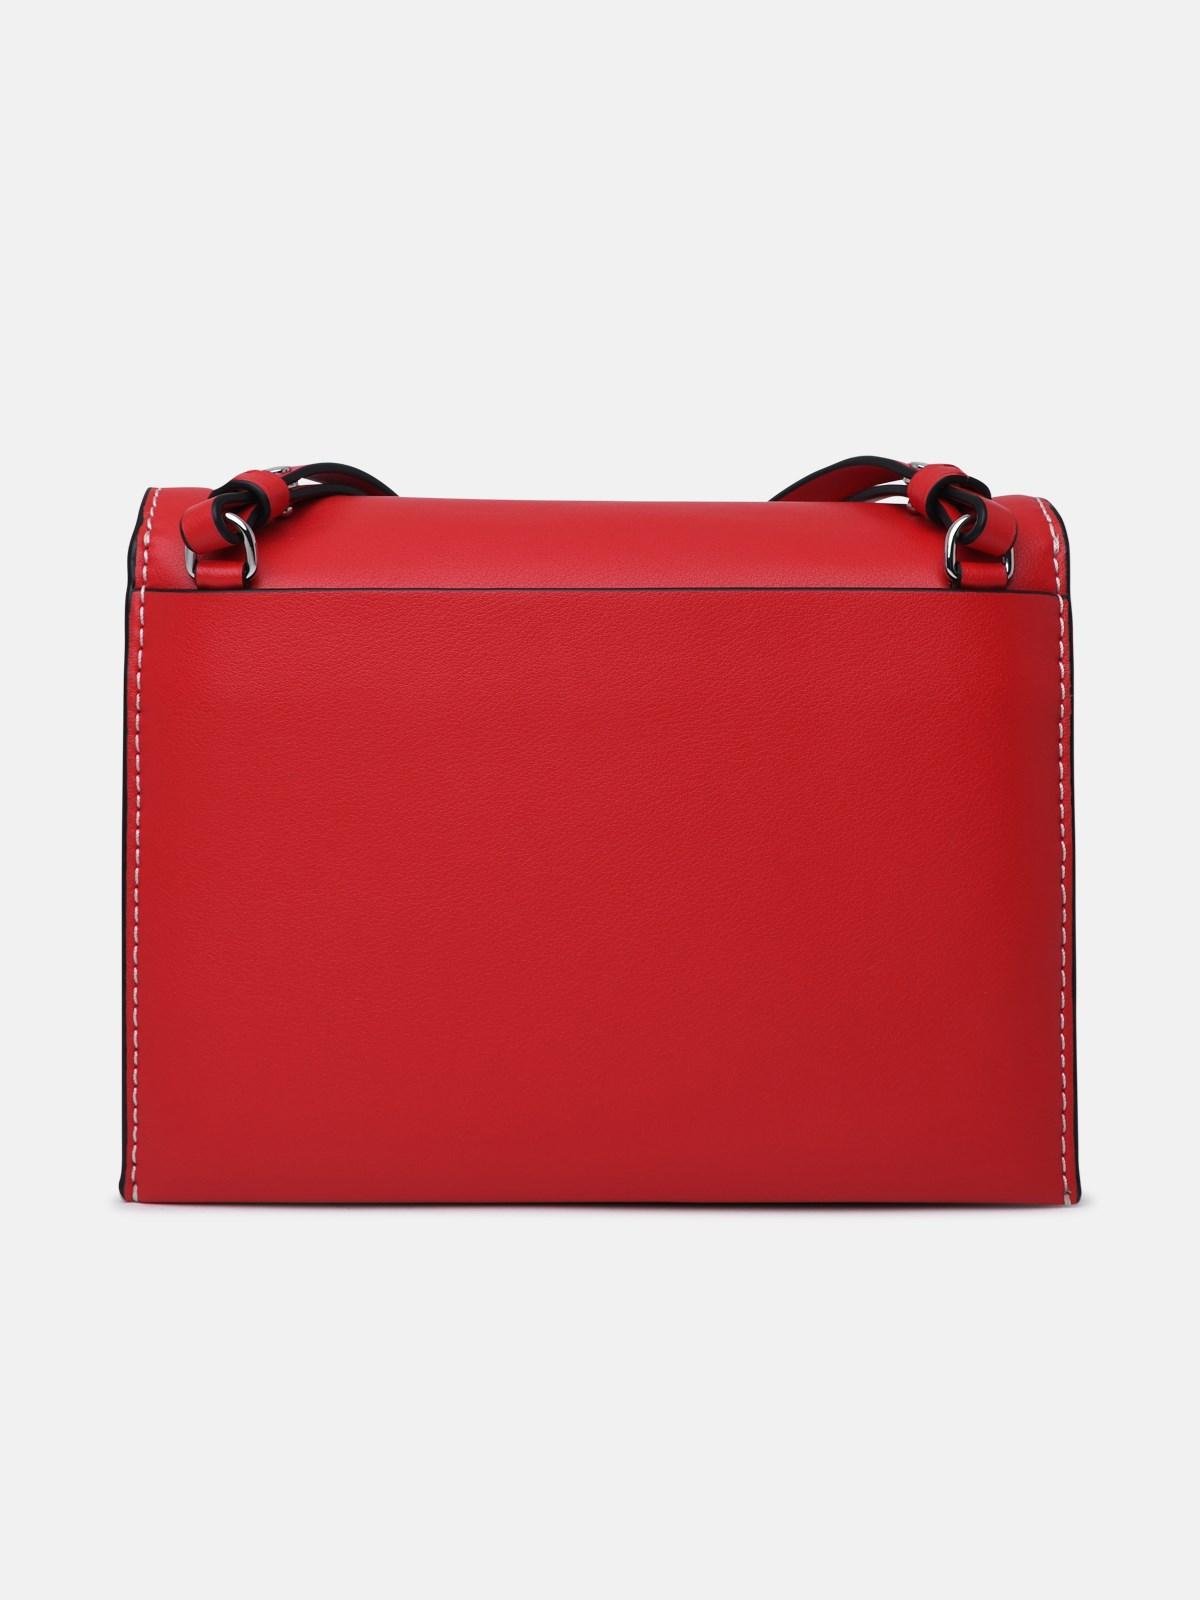 PROENZA SCHOULER WHITE LABEL Leather Accordion Bag in Red